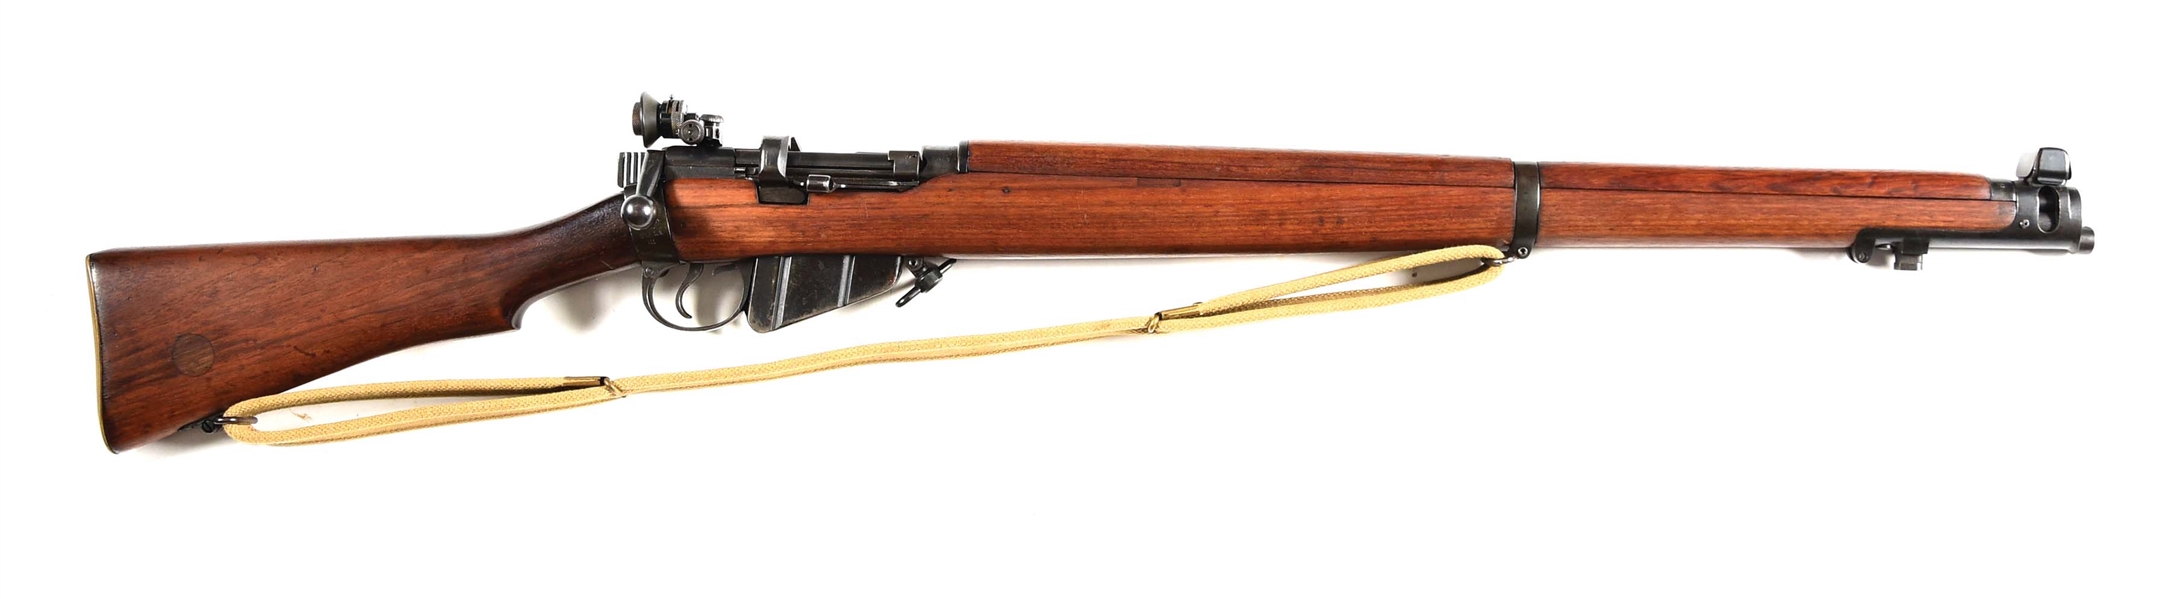 (C) RARE COMMERCIAL B.S.A. SMLE MK III HB TARGET BOLT ACTION RIFLE.